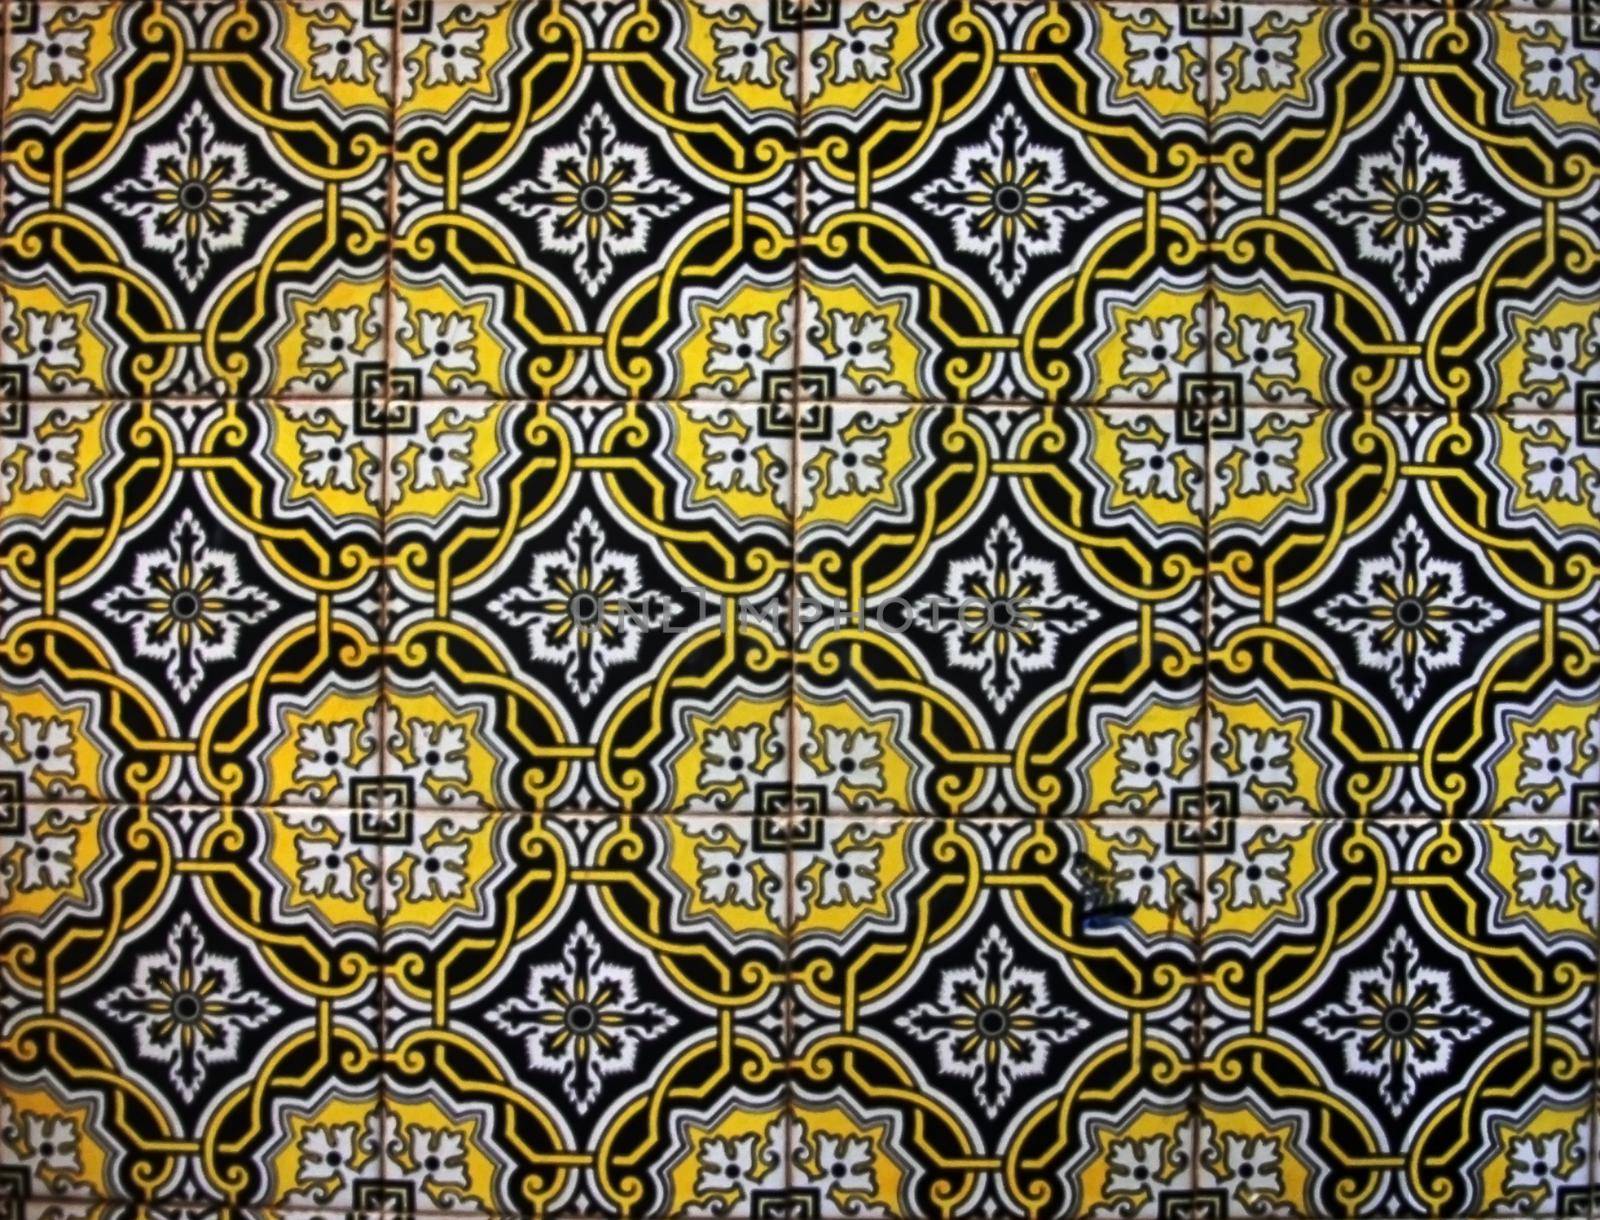 Black, blue, yellow and white colored portuguese tile from Tavira, Portugal